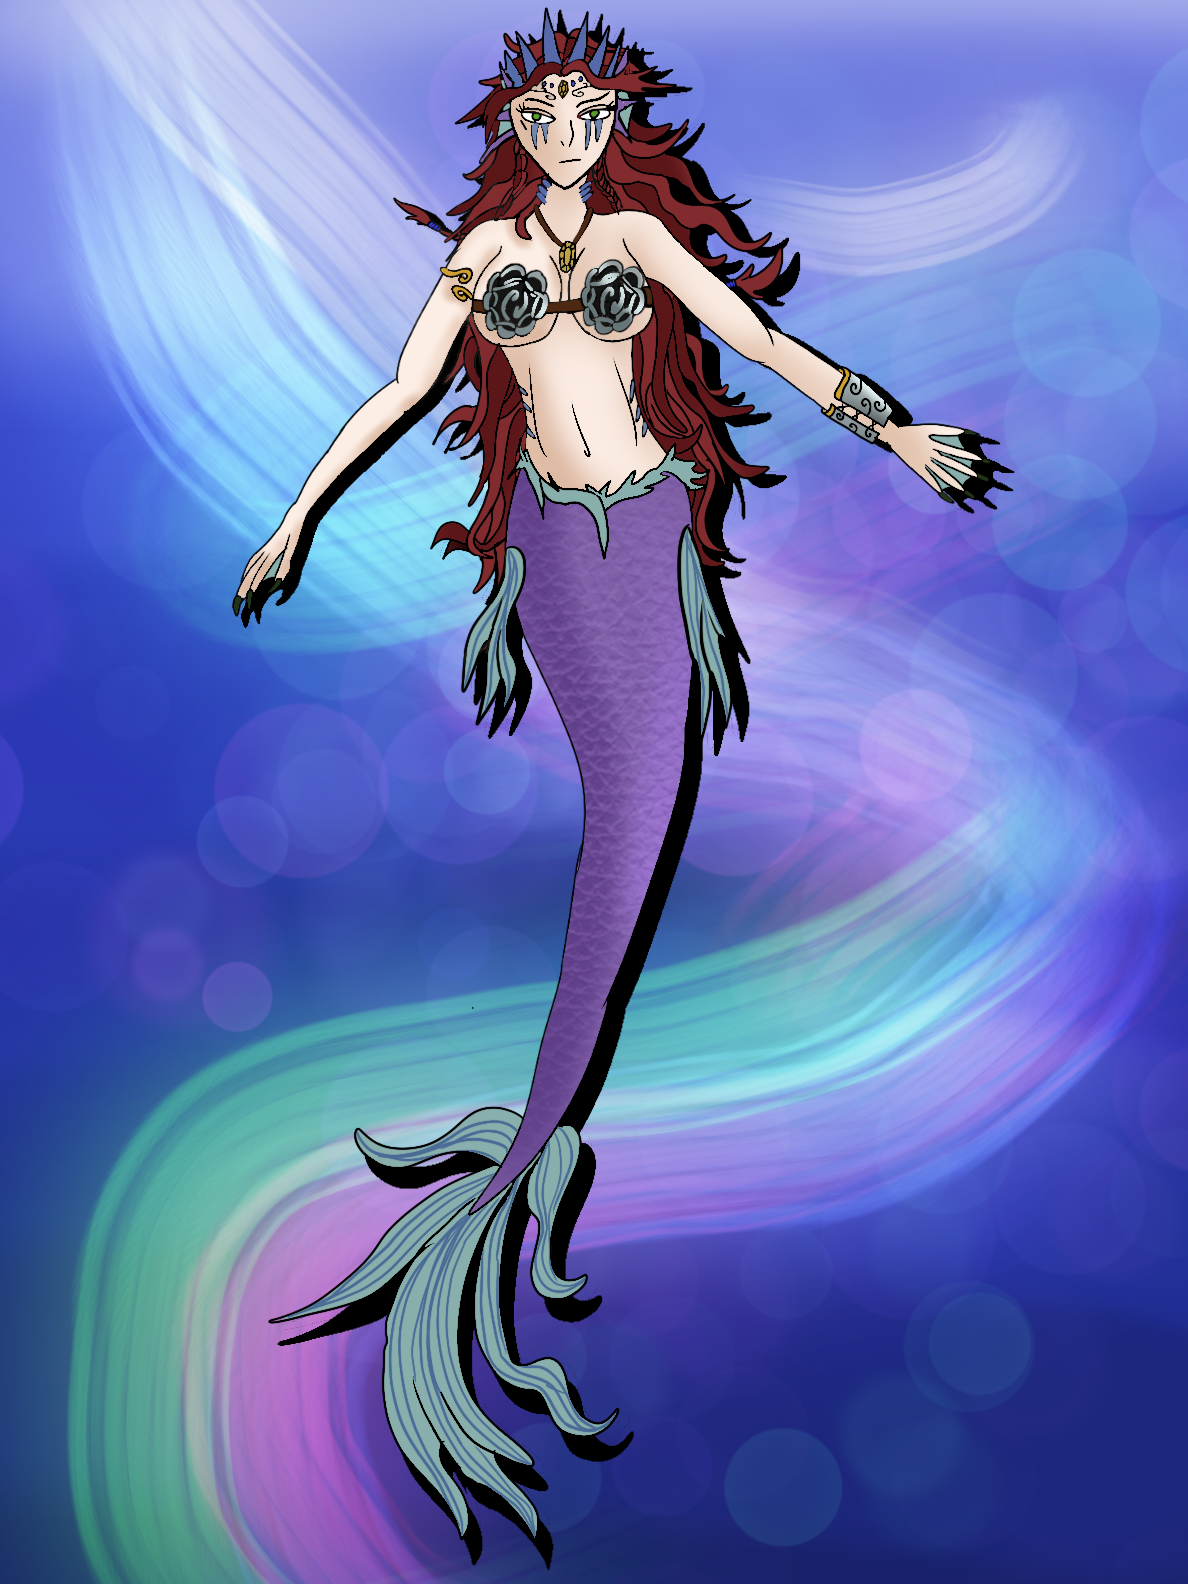 Ahes Dahut, Queen of Ys-Beneath-the-Waves